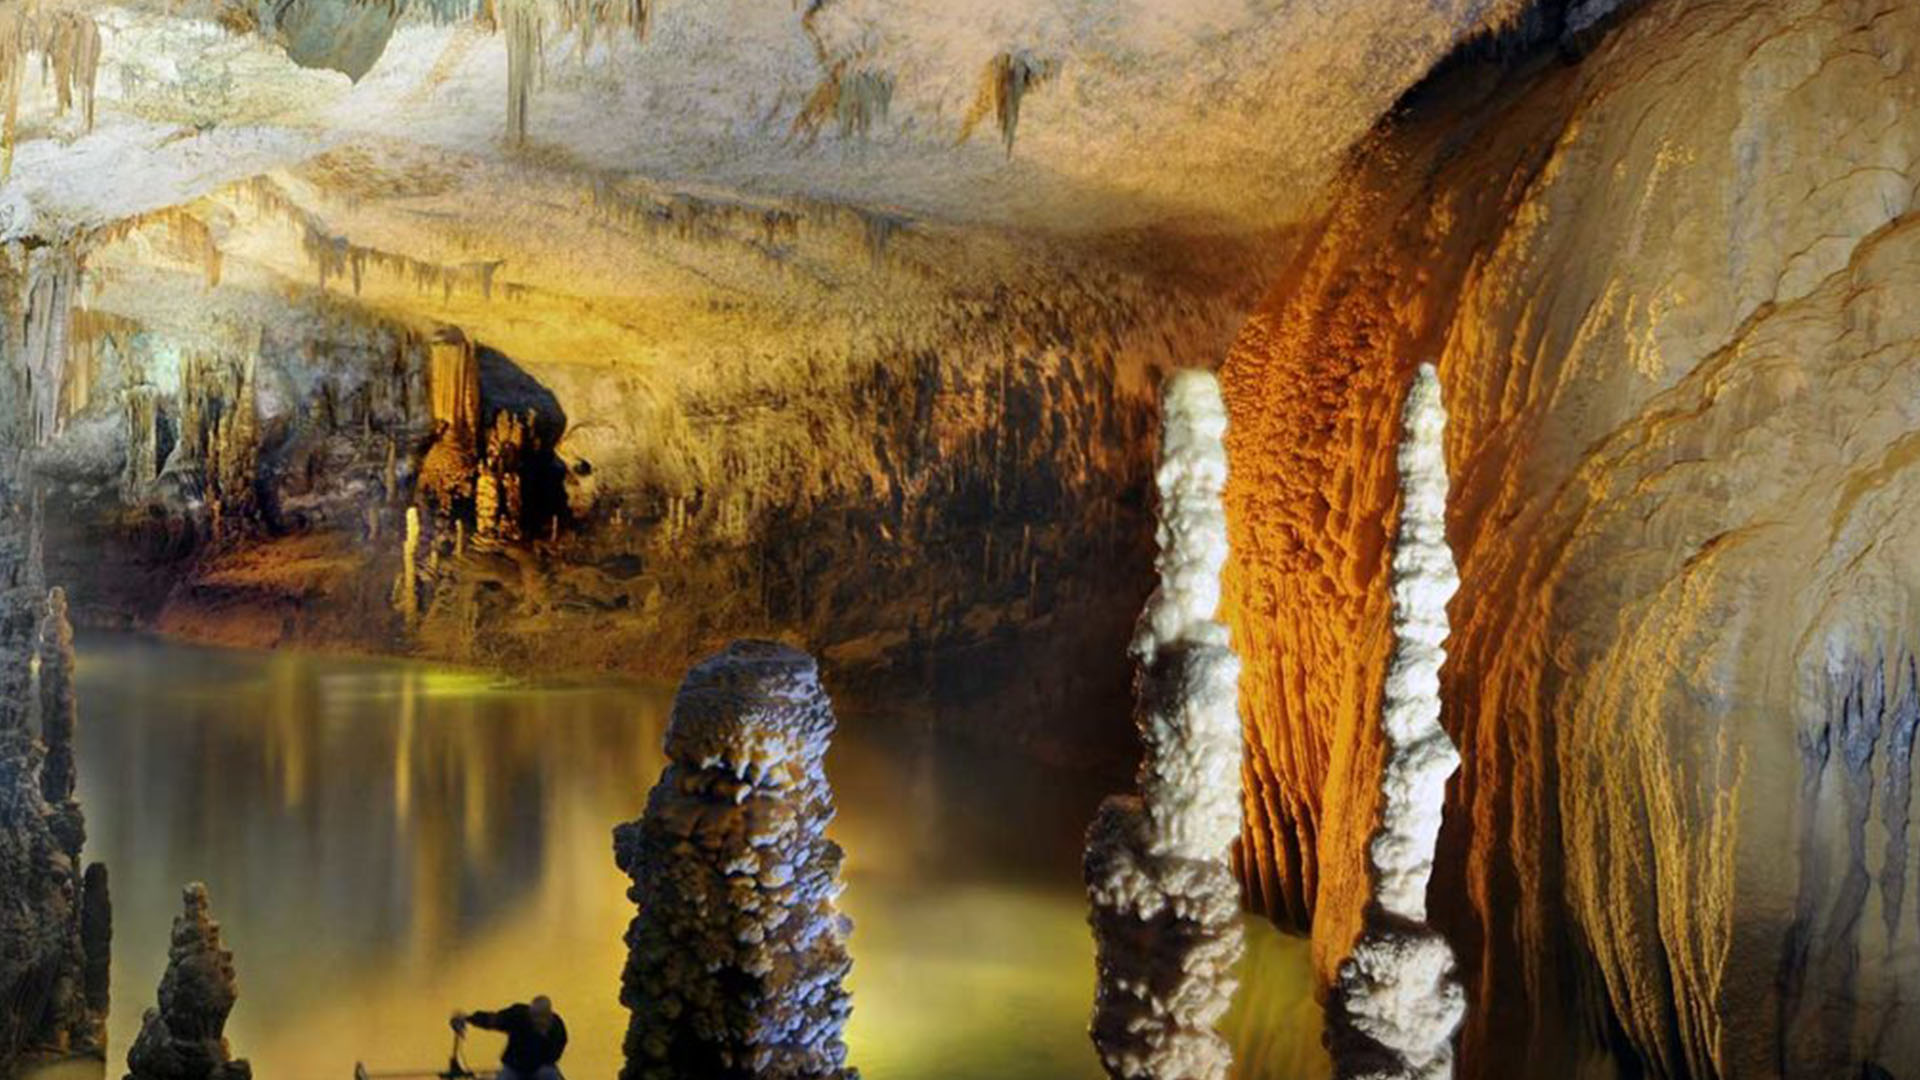 A photograph reveals the mesmerizing beauty of Jeita Grotto, showcasing its intricate limestone formations and the hidden marvels that lie beneath the surface.